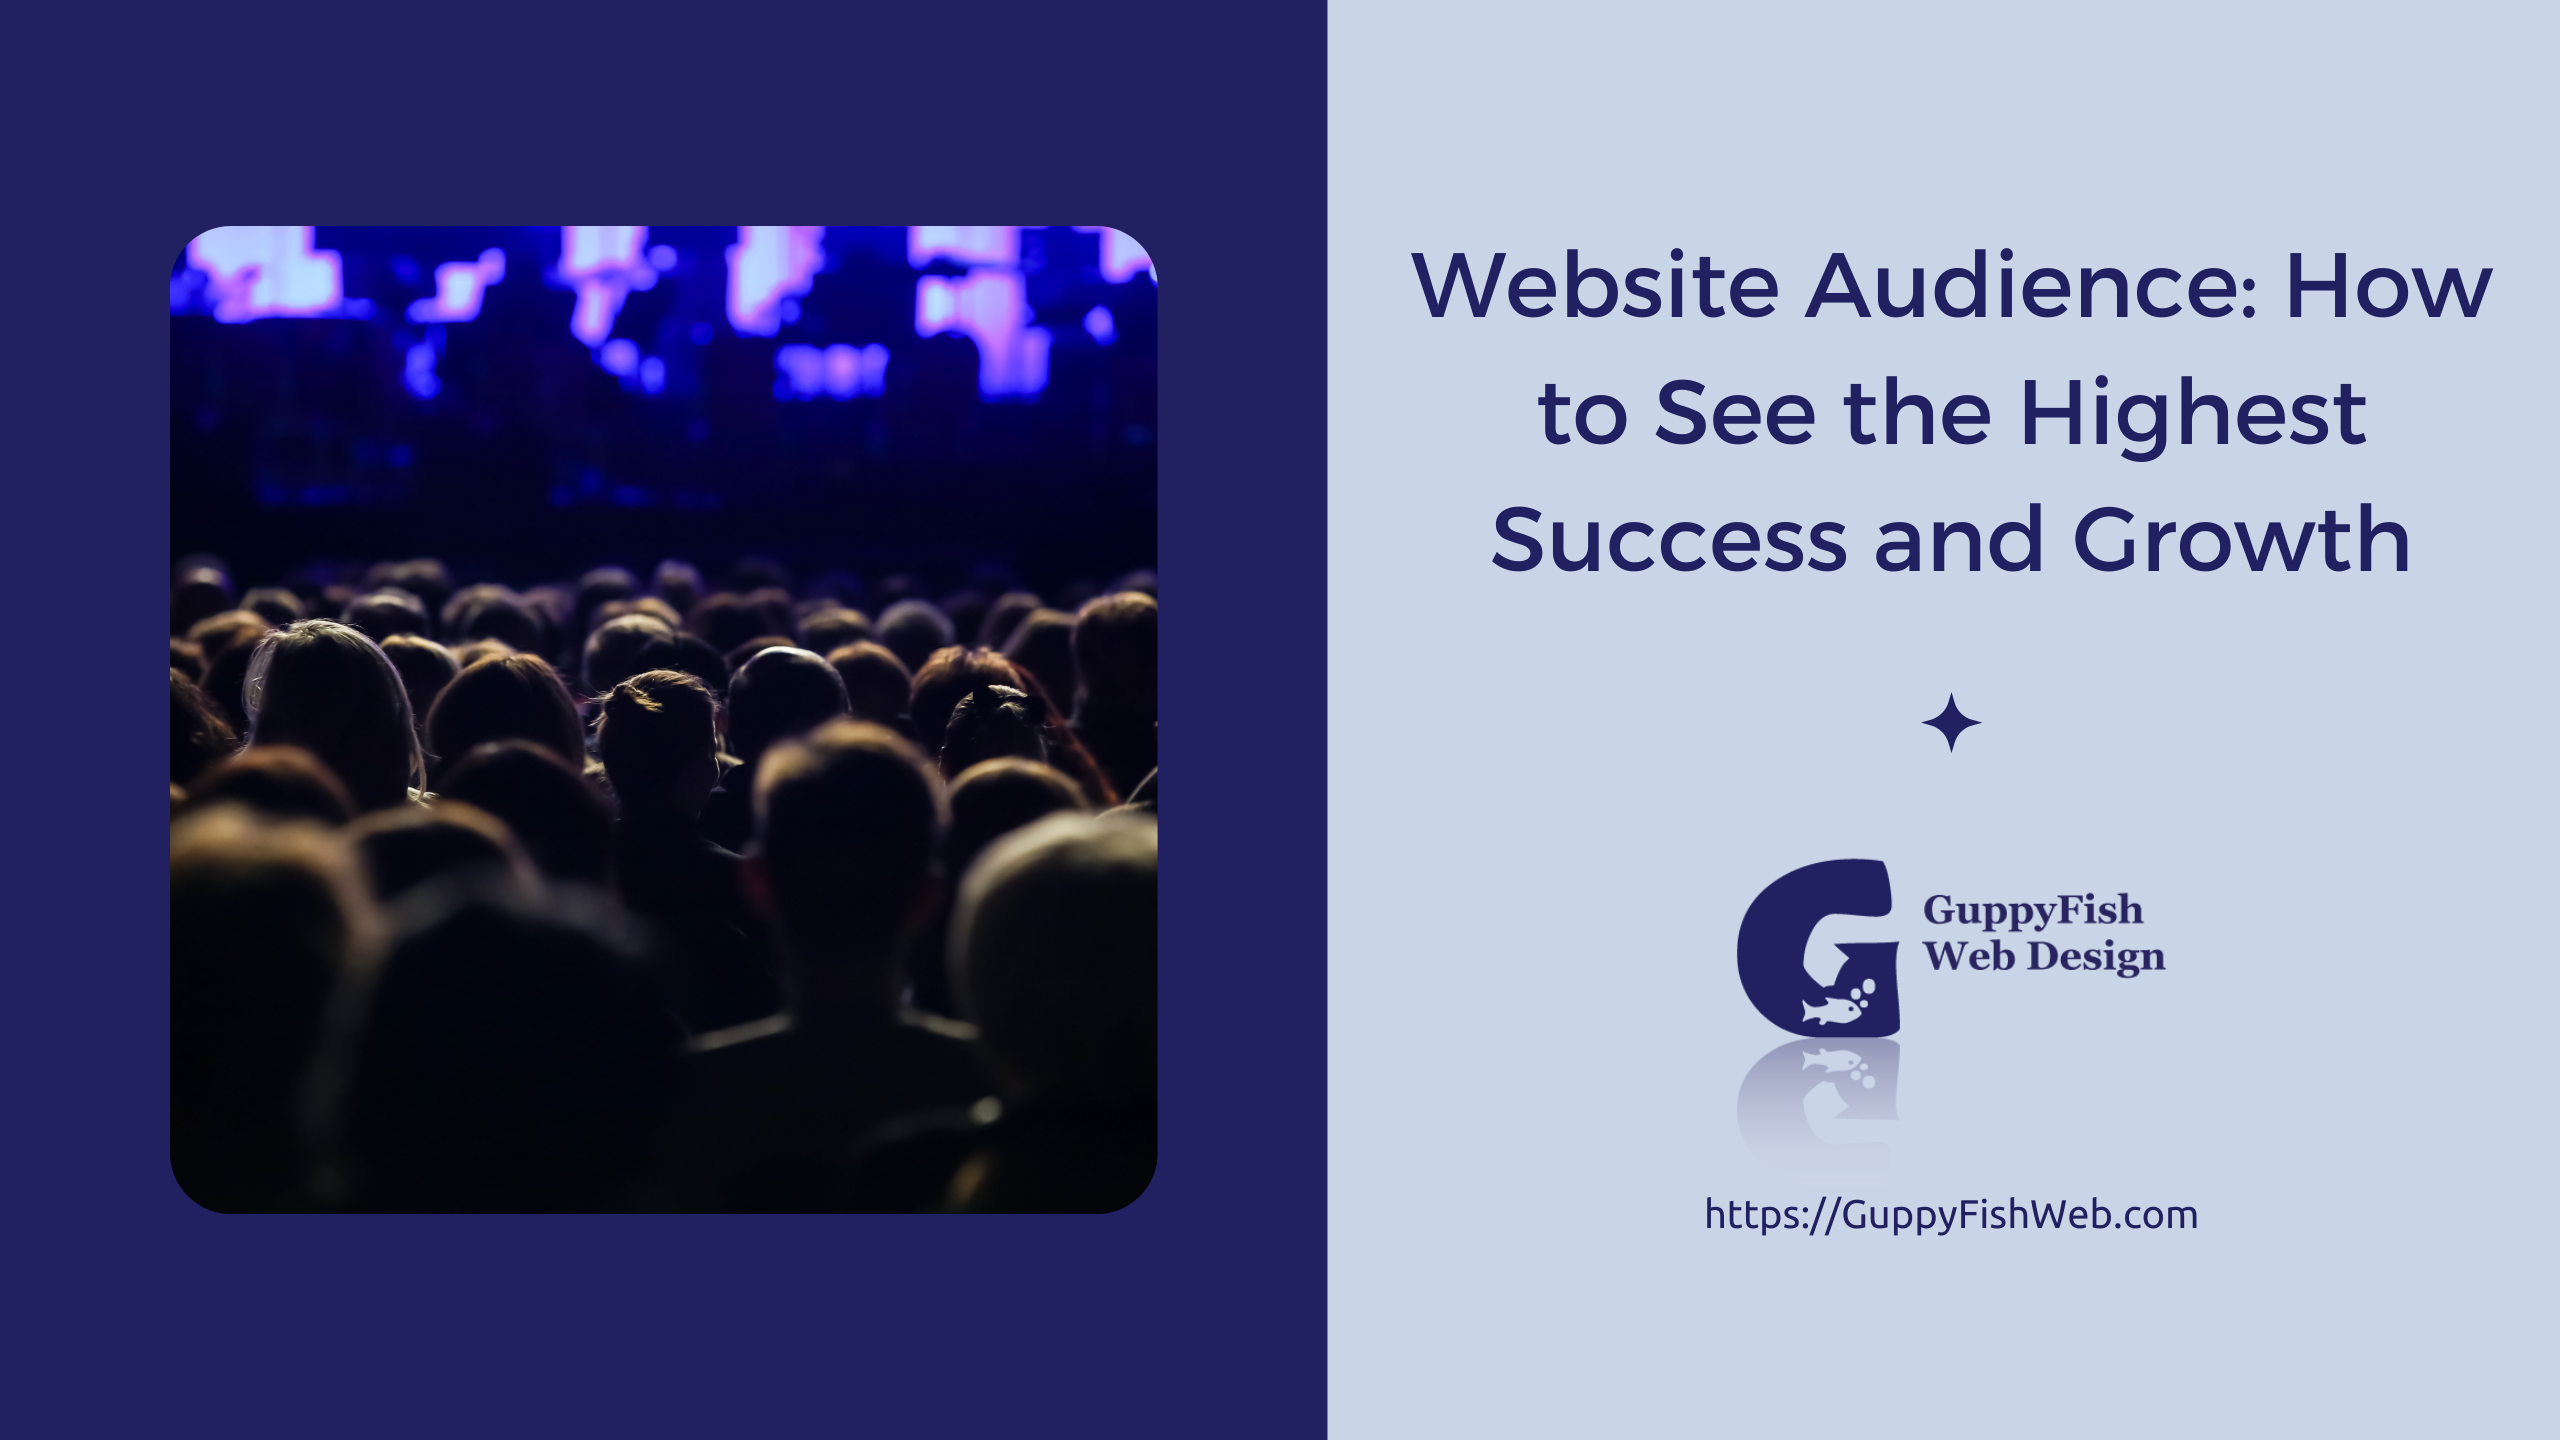 Website Audience: How to See the Highest Success and Growth